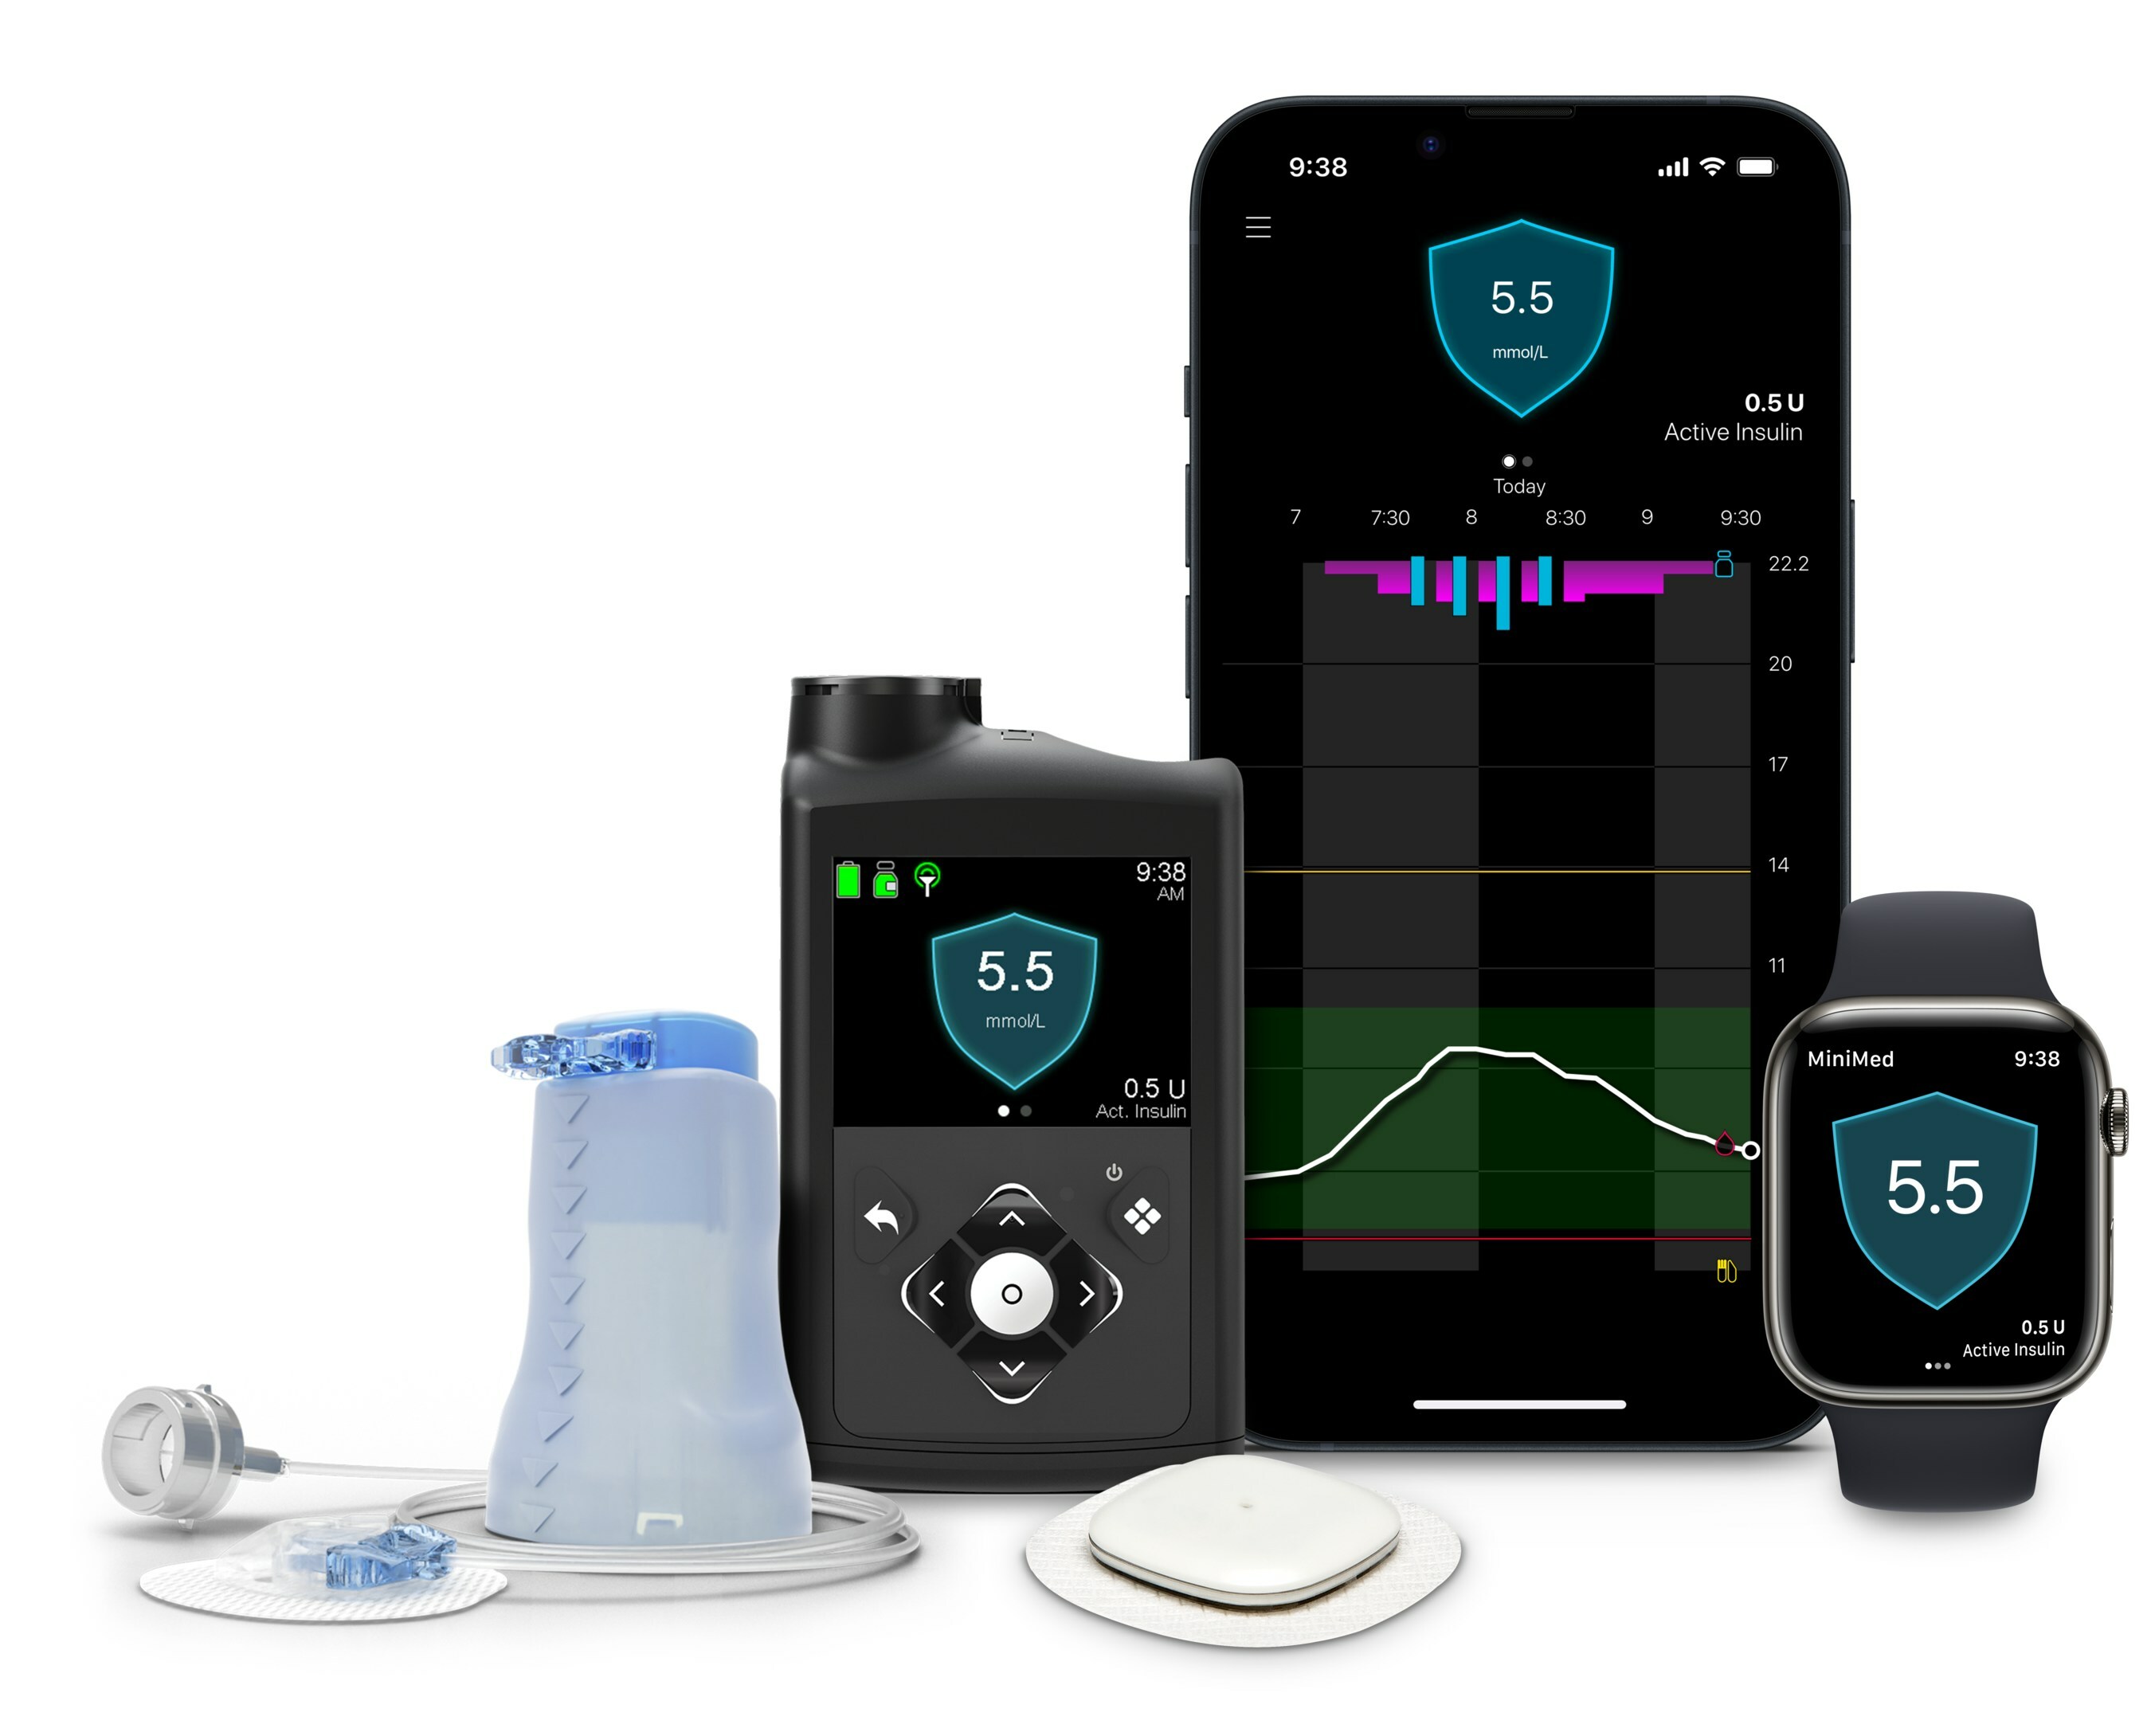 Medtronic Diabetes announces world's first approval for MiniMed